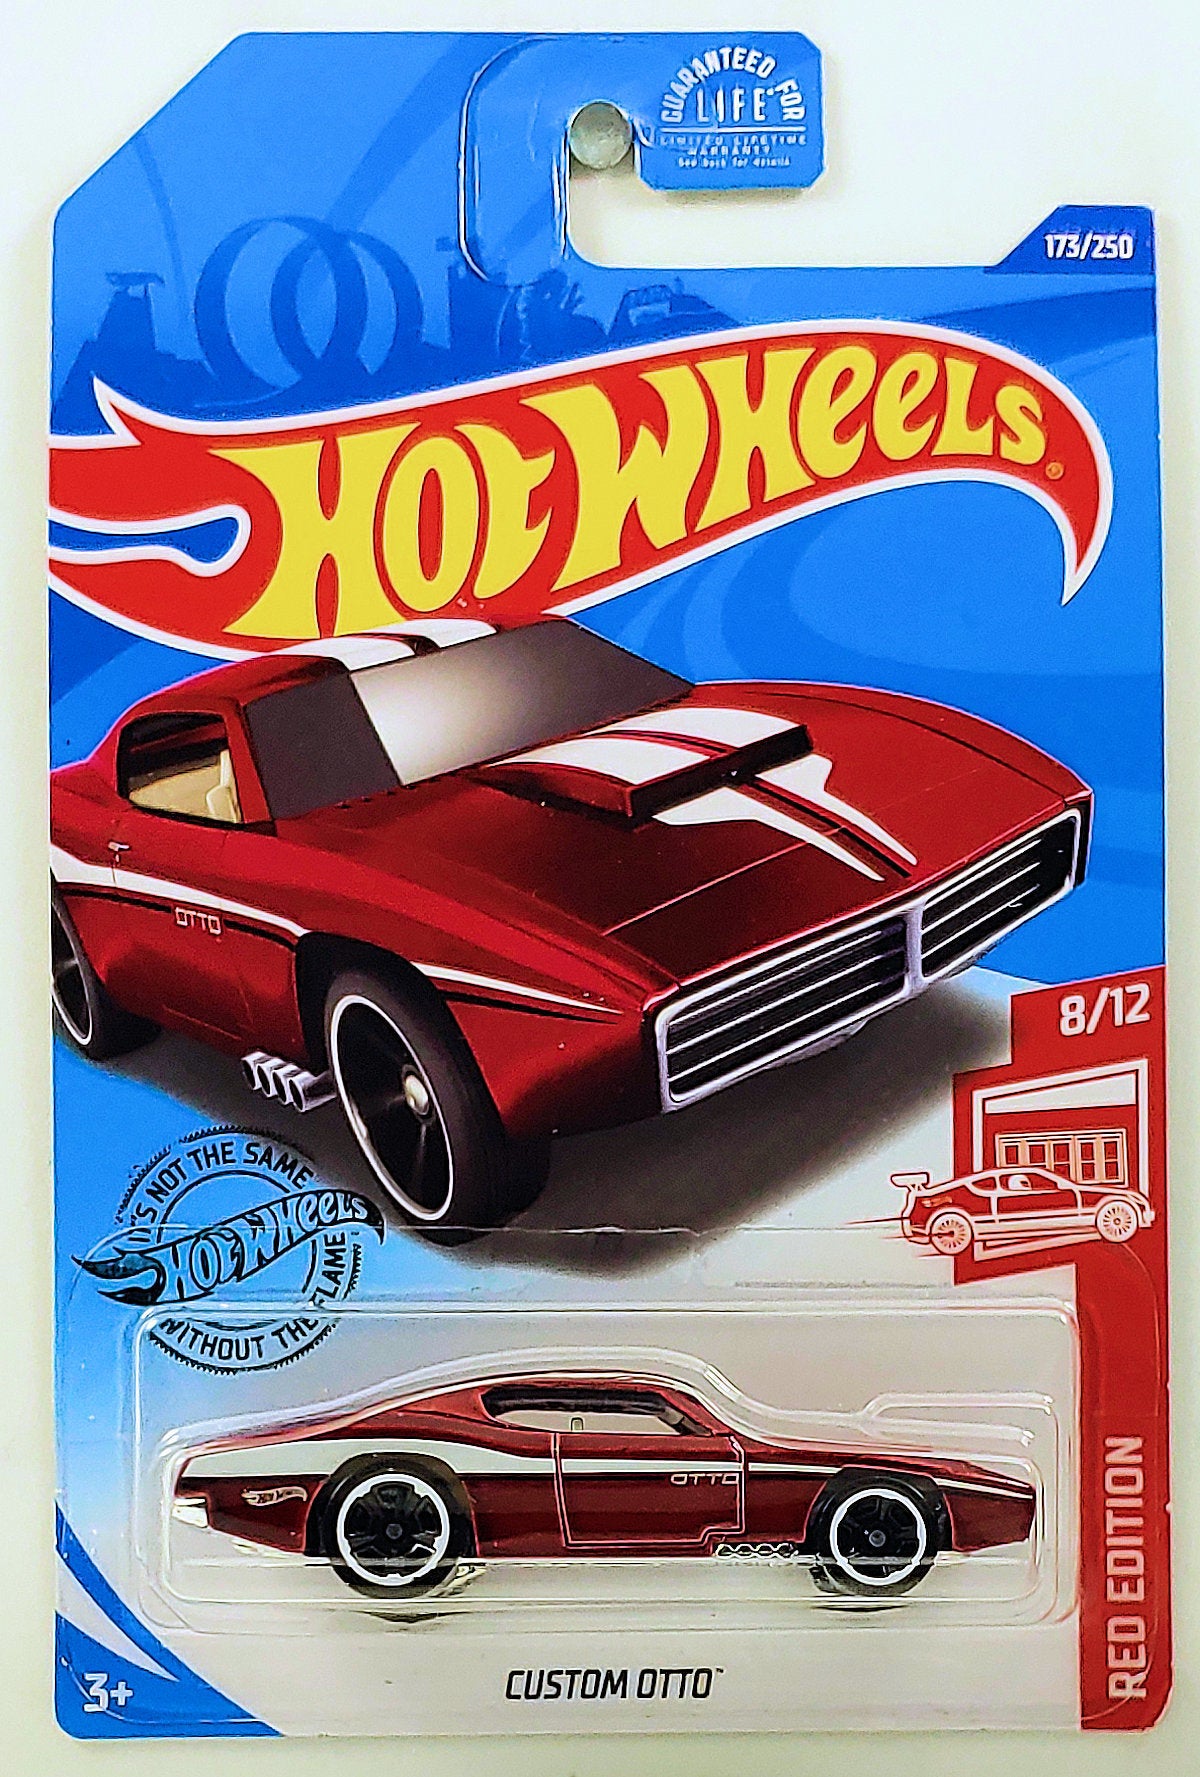 Hot Wheels 2020 - Collector # 173/250 - Red Edition 8/12 - Custom Otto - Red Metallic - USA Card - Target Exclusive